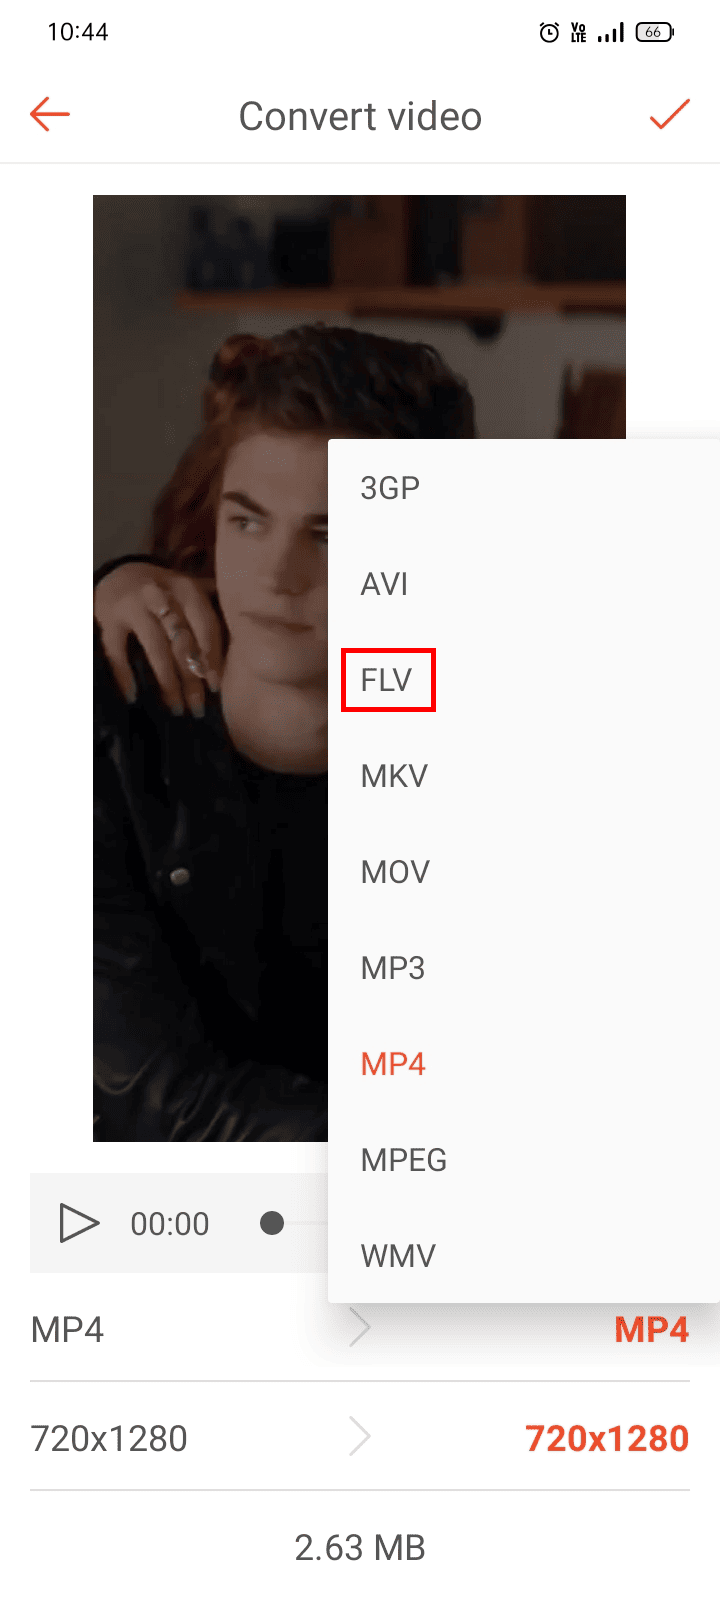 Tap on the FLV option from the drop-down menu.